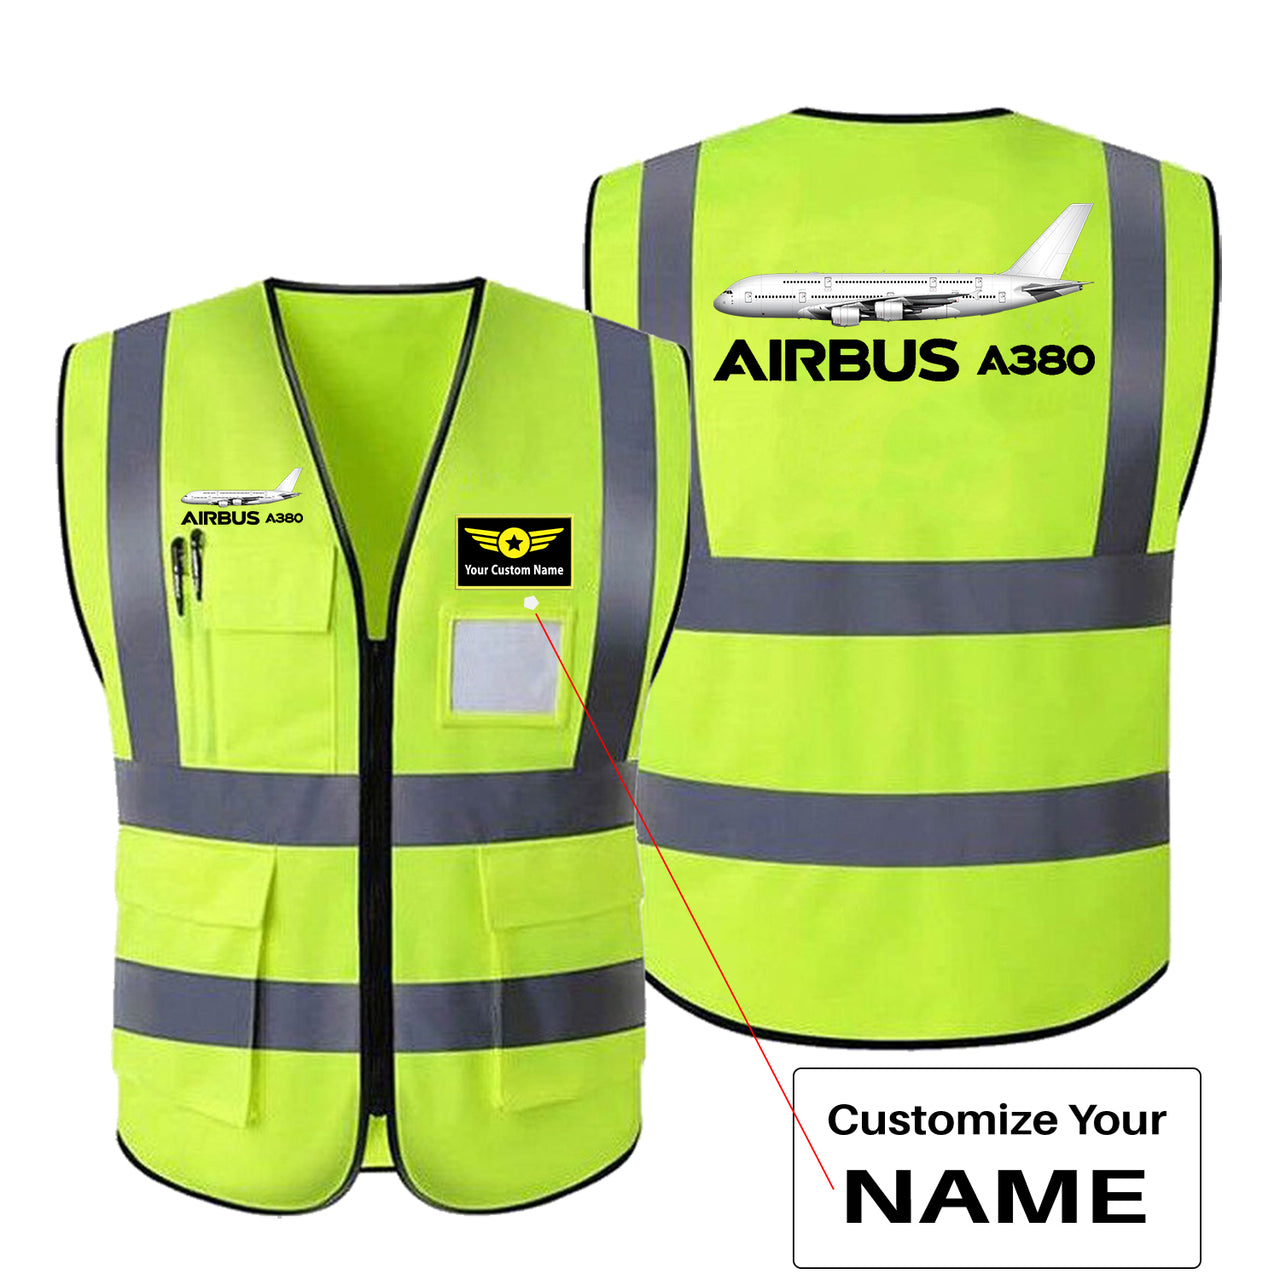 The Airbus A380 Designed Reflective Vests